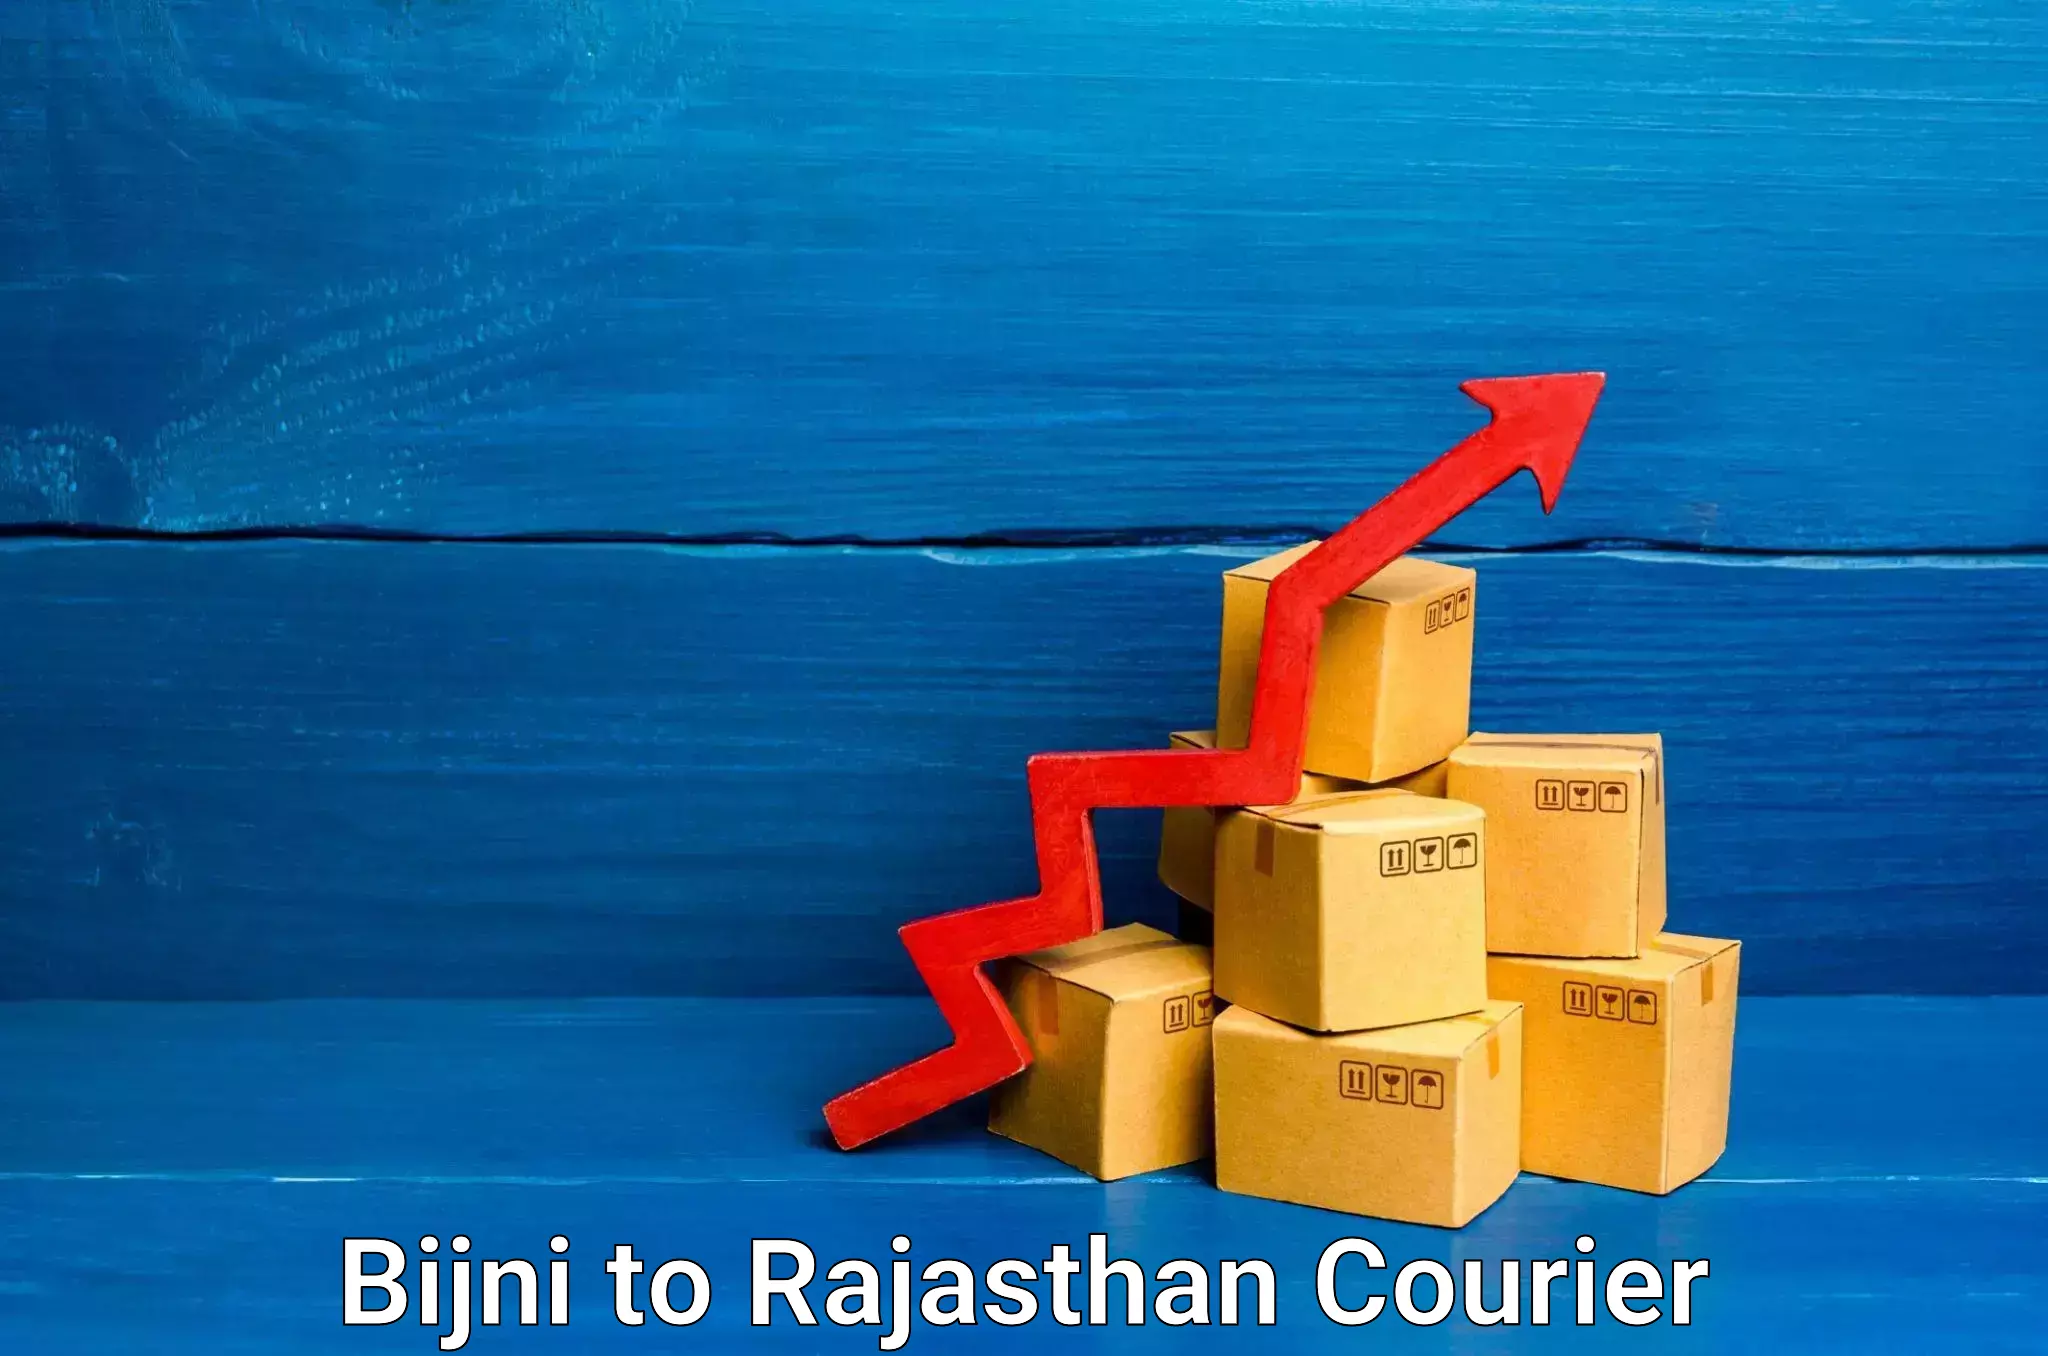 Courier service innovation Bijni to Rajasthan